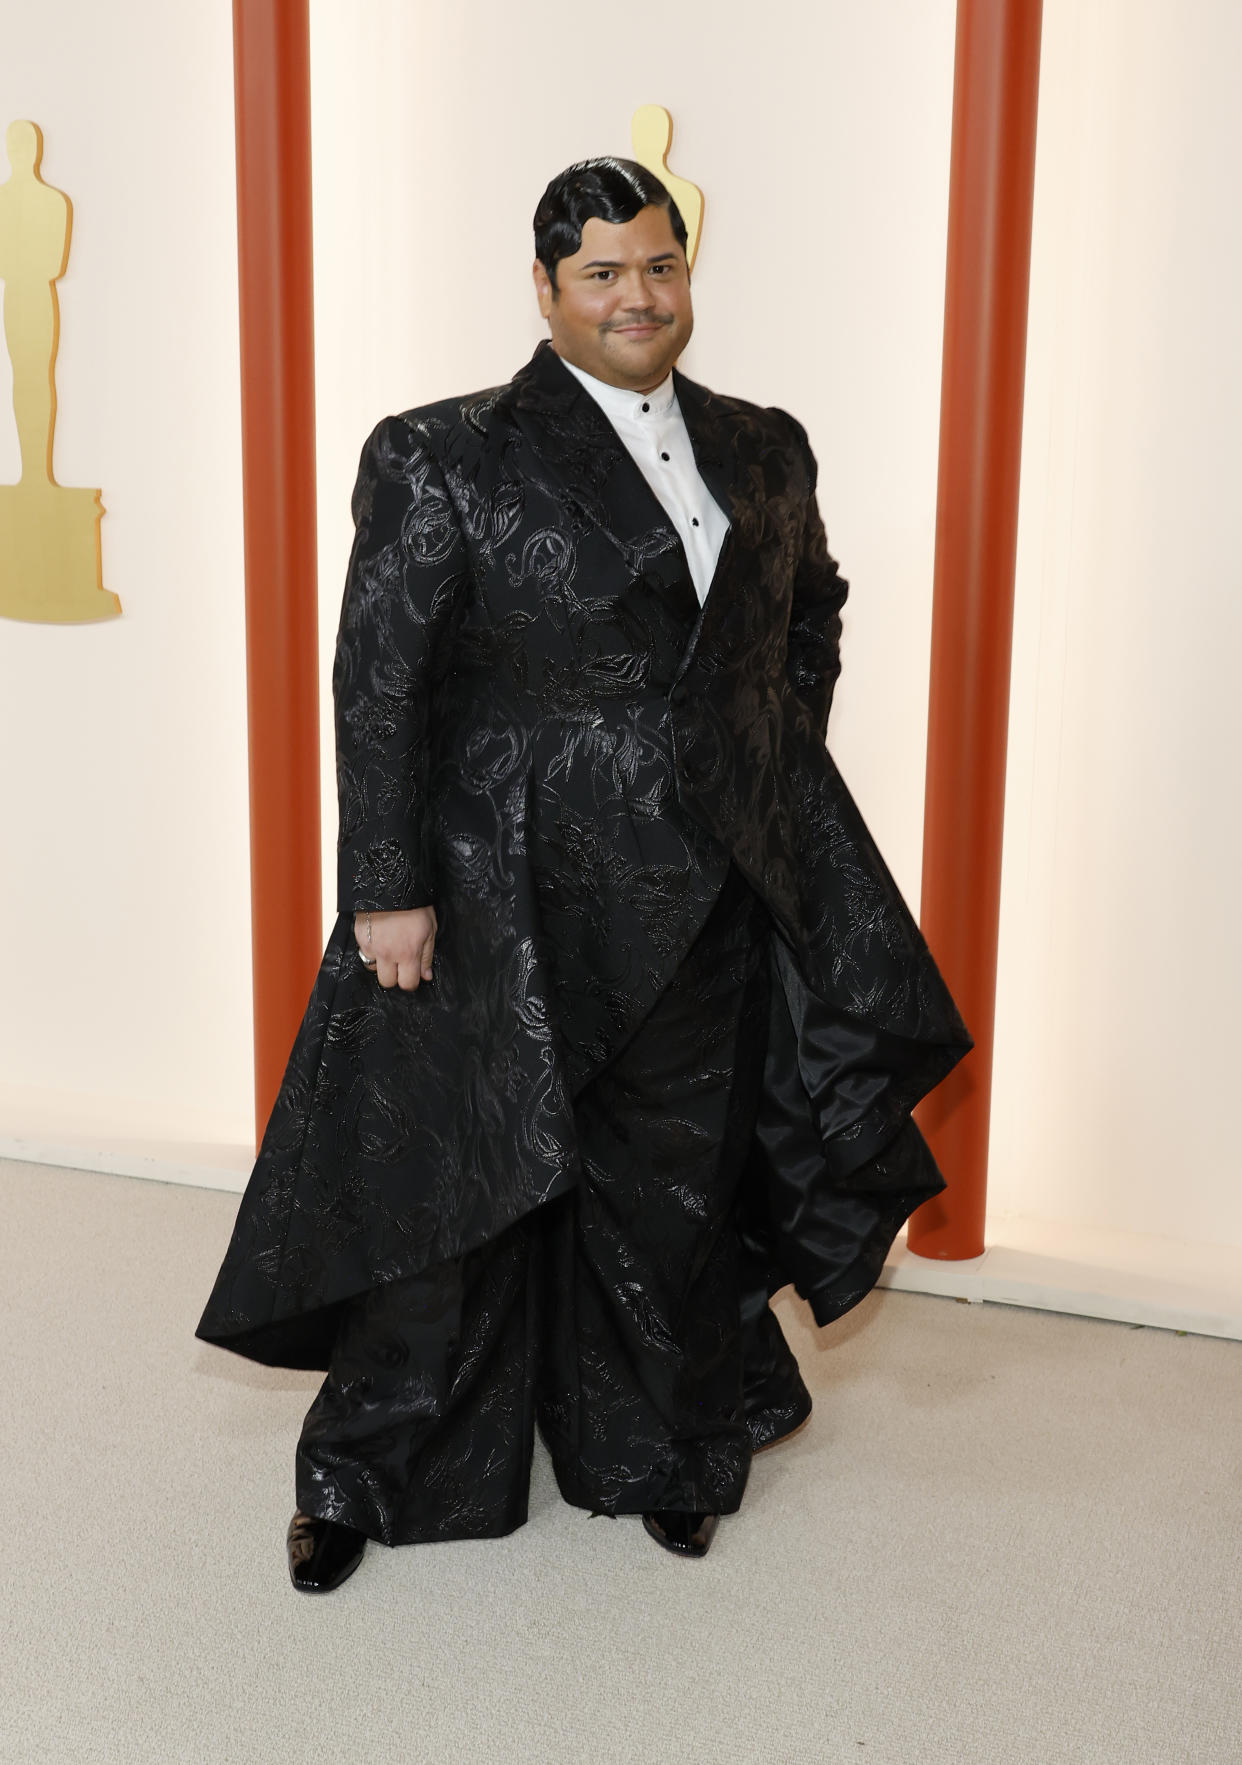 HOLLYWOOD, CALIFORNIA - MARCH 12: Harvey Guillen attends the 95th Annual Academy Awards on March 12, 2023 in Hollywood, California. (Photo by Mike Coppola/Getty Images)